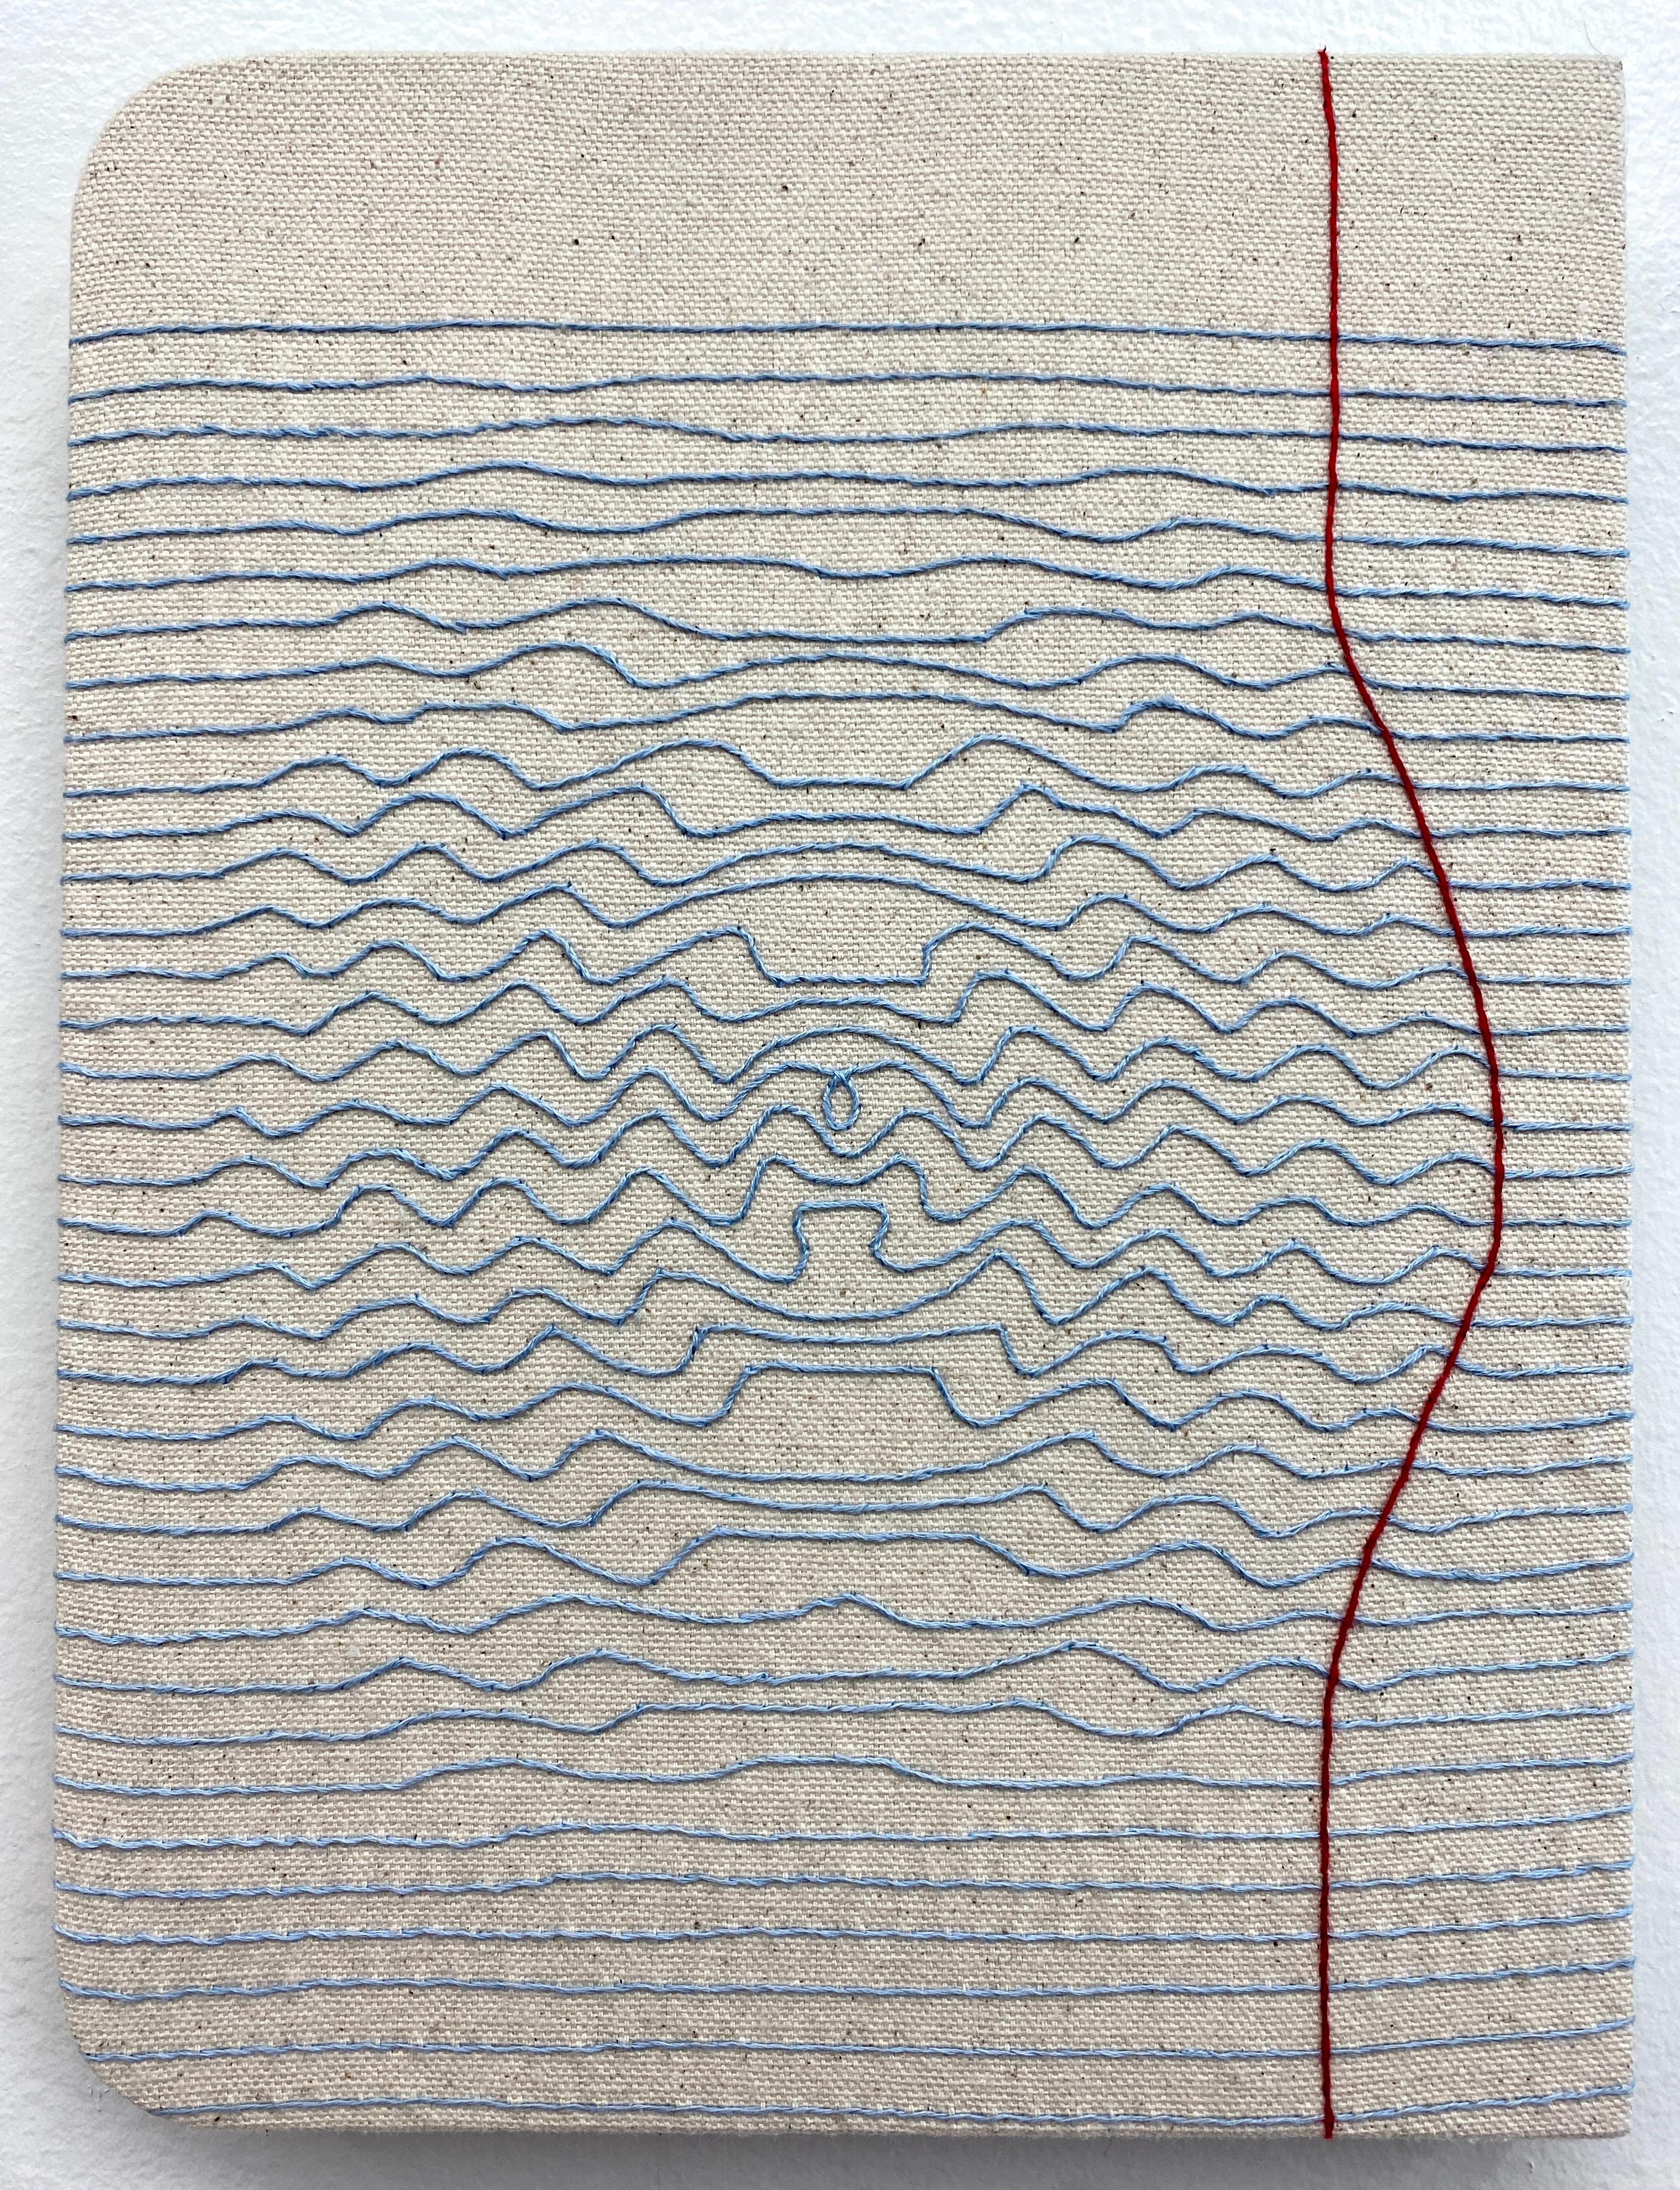 Notes for String Theory 040922, Contemporary Embroidery on Canvas, Hand Stitched - Art by Candace Hicks